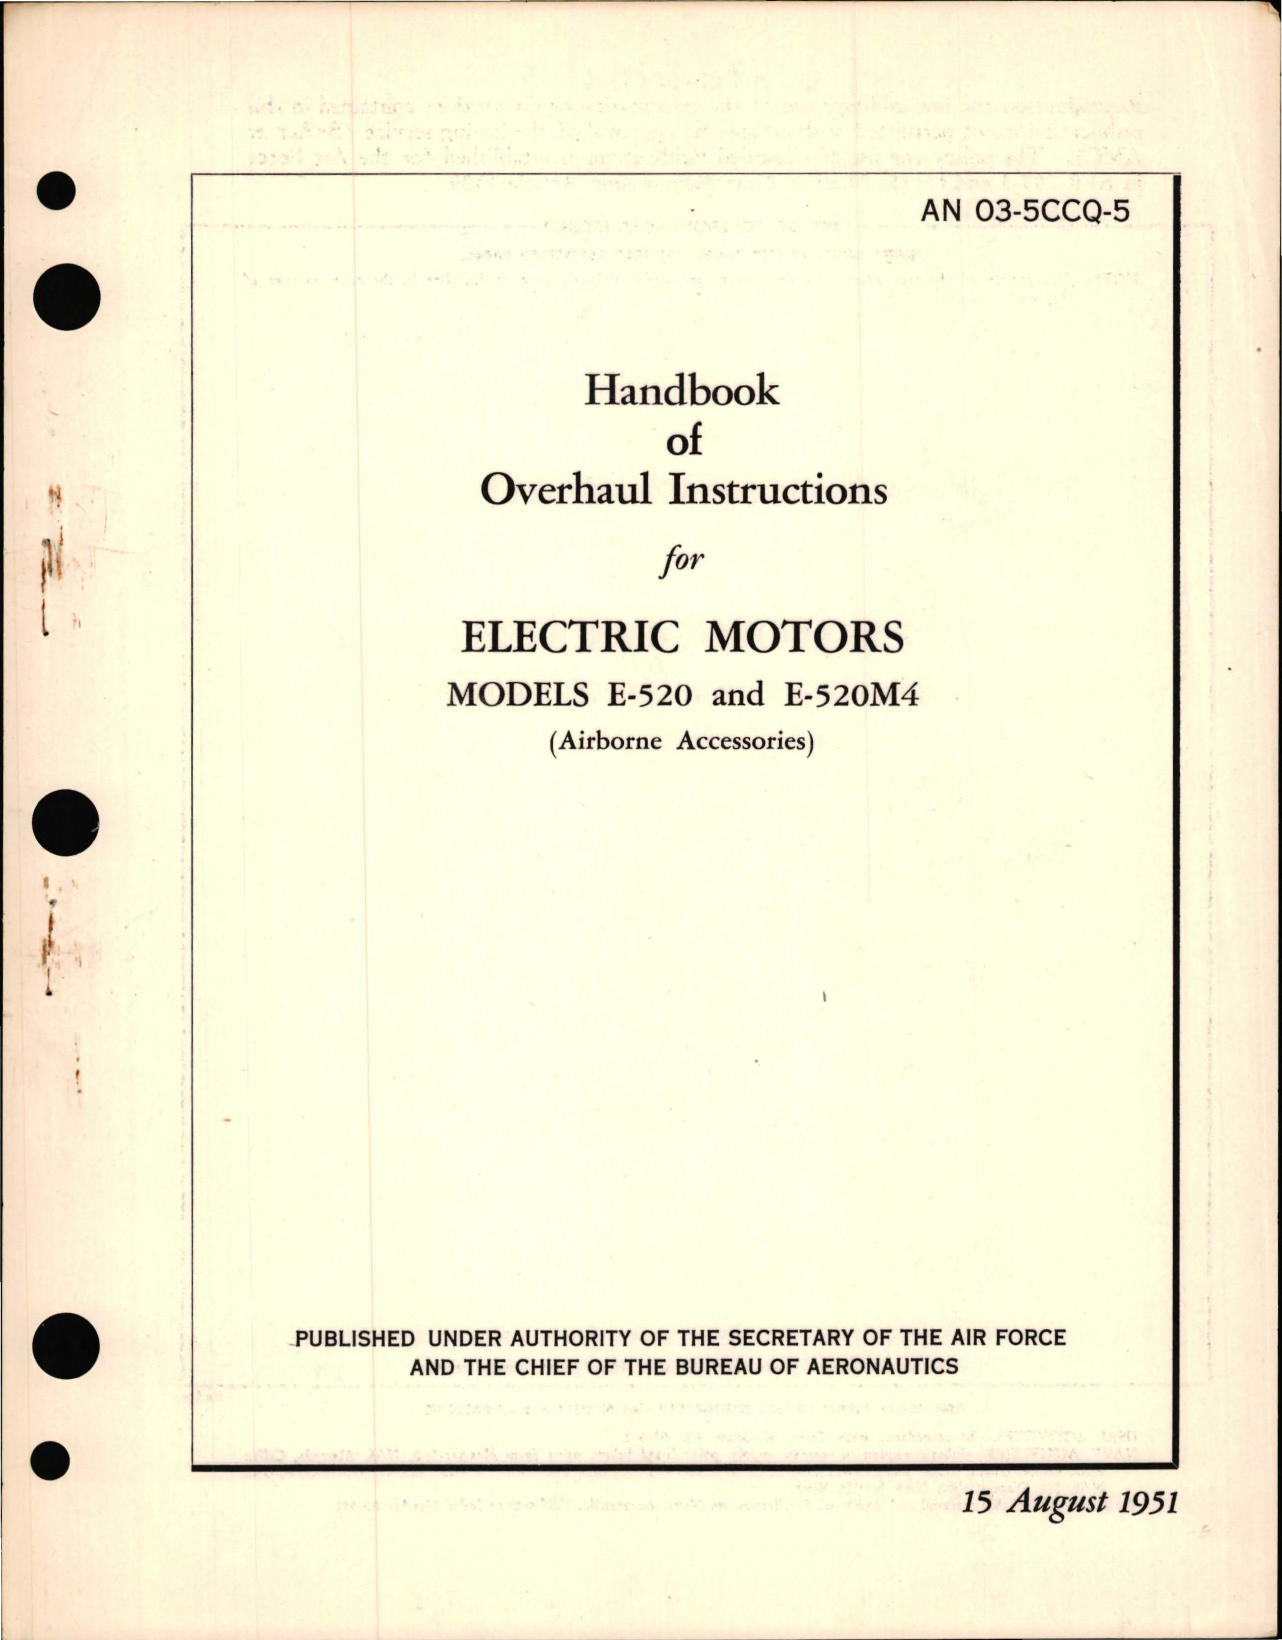 Sample page 1 from AirCorps Library document: Overhaul Instructions for Electric Motors - Models E-520 and E-520M4 